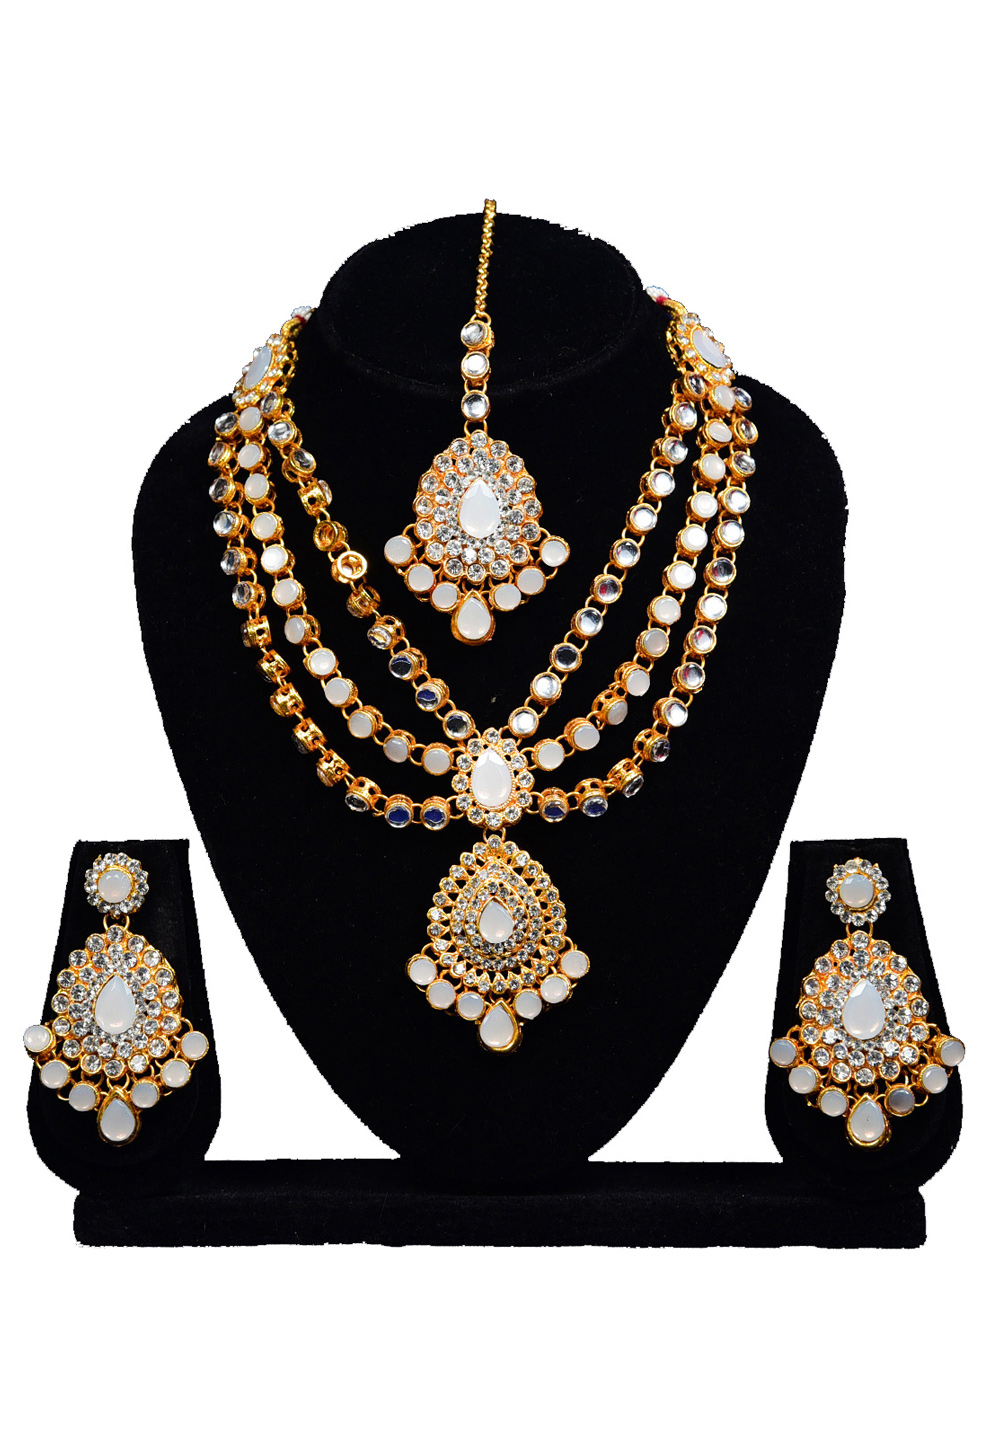 Off White Alloy Austrian Diamond Necklace Set With Earrings and Maang Tikka 247958